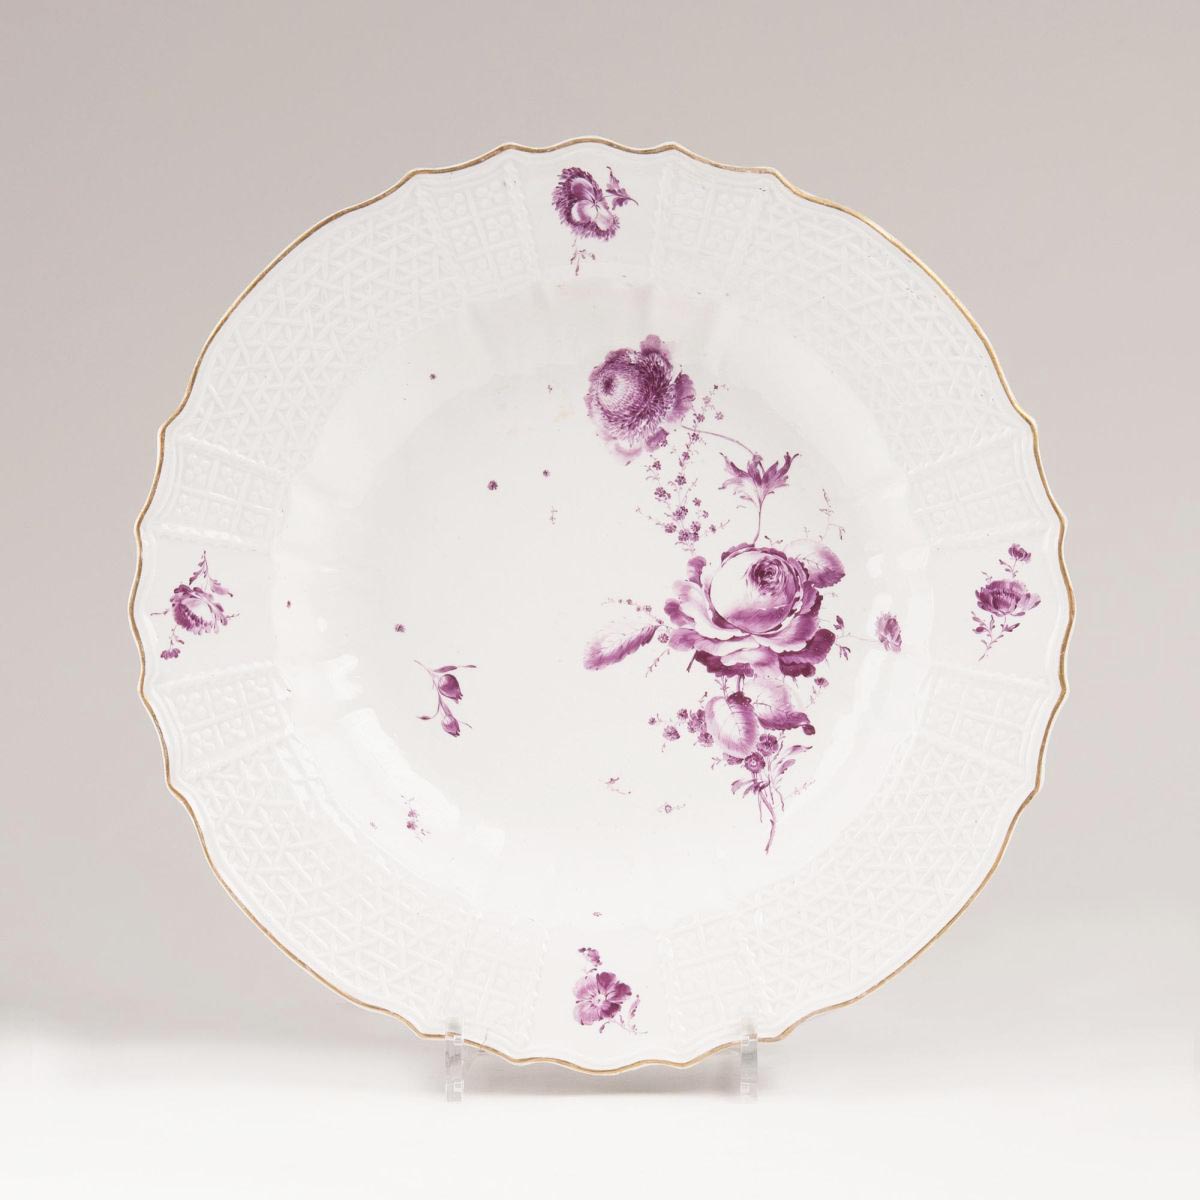 A Large Round Plate with Crimson Flowers